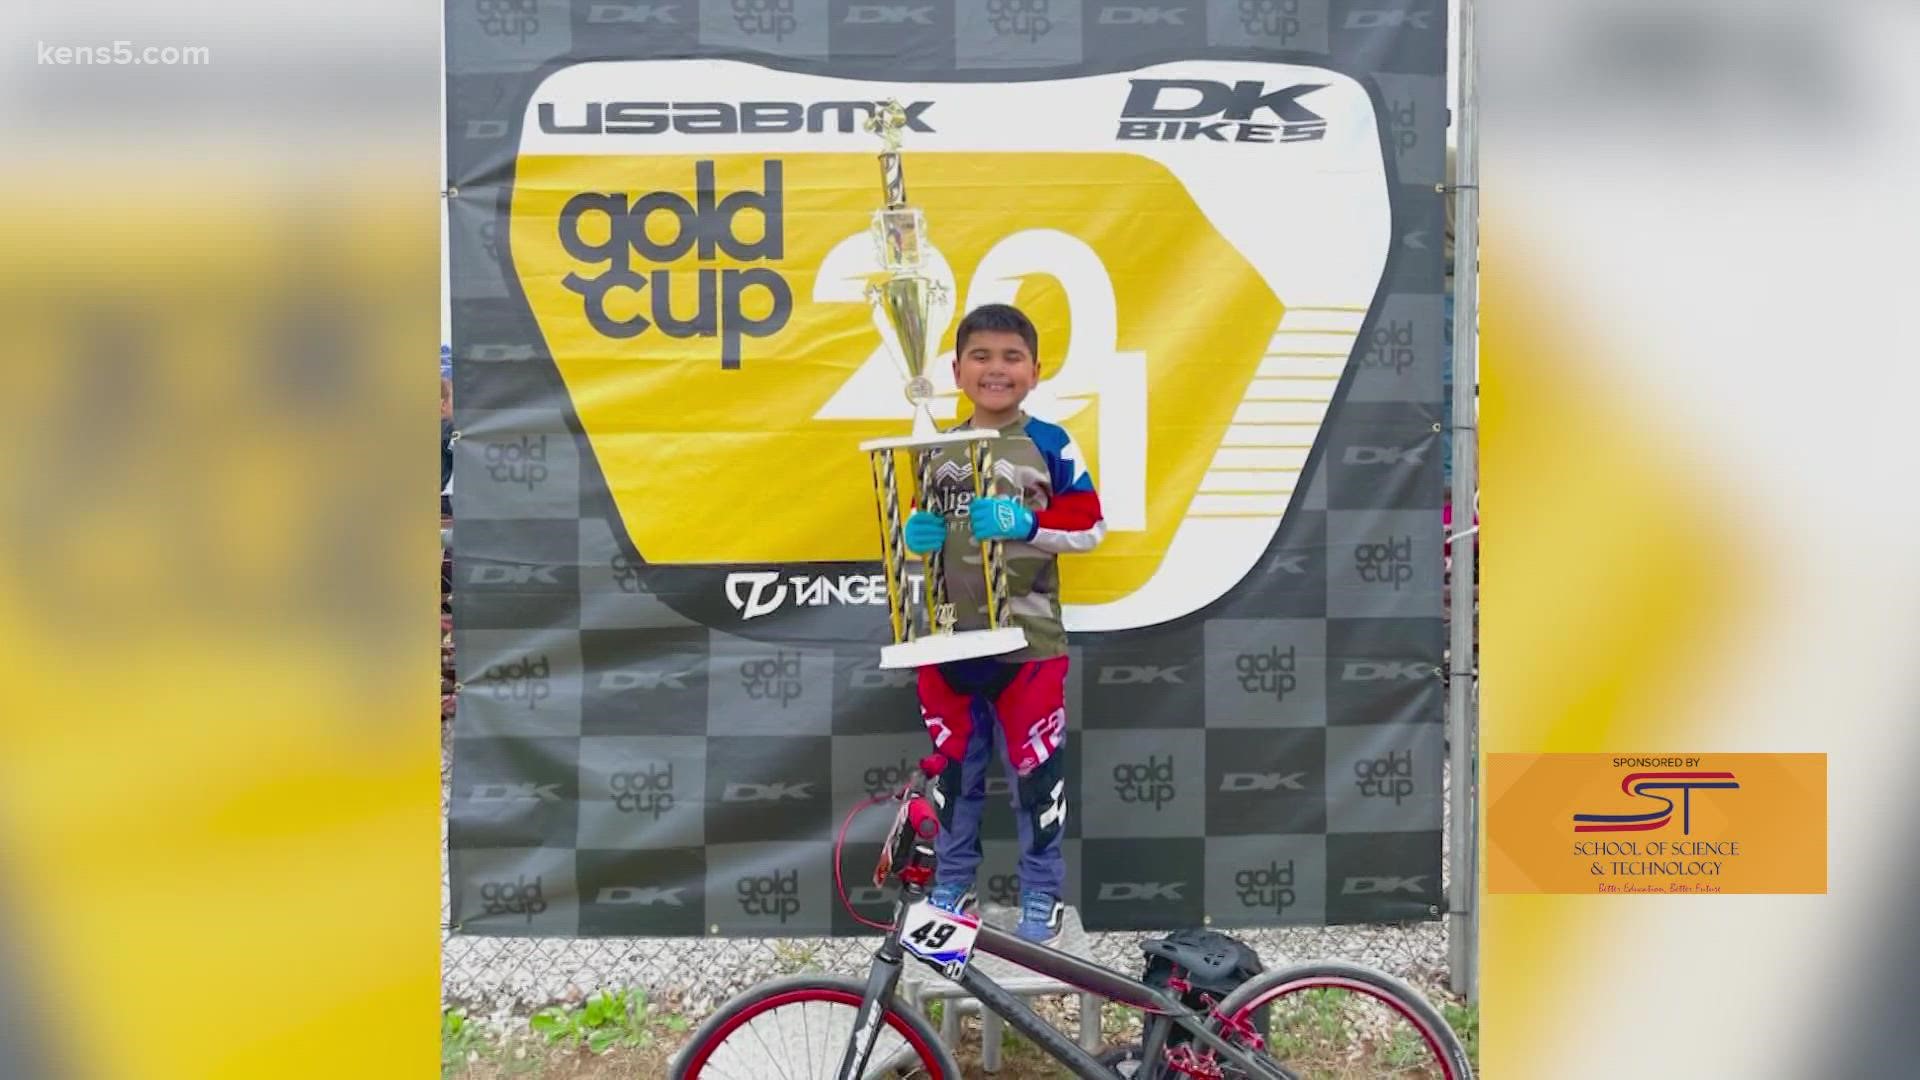 Dominic the Dominator is no ordinary kid. He actually won his first race last September and has been taking victories ever since despite an obstacle in the road.